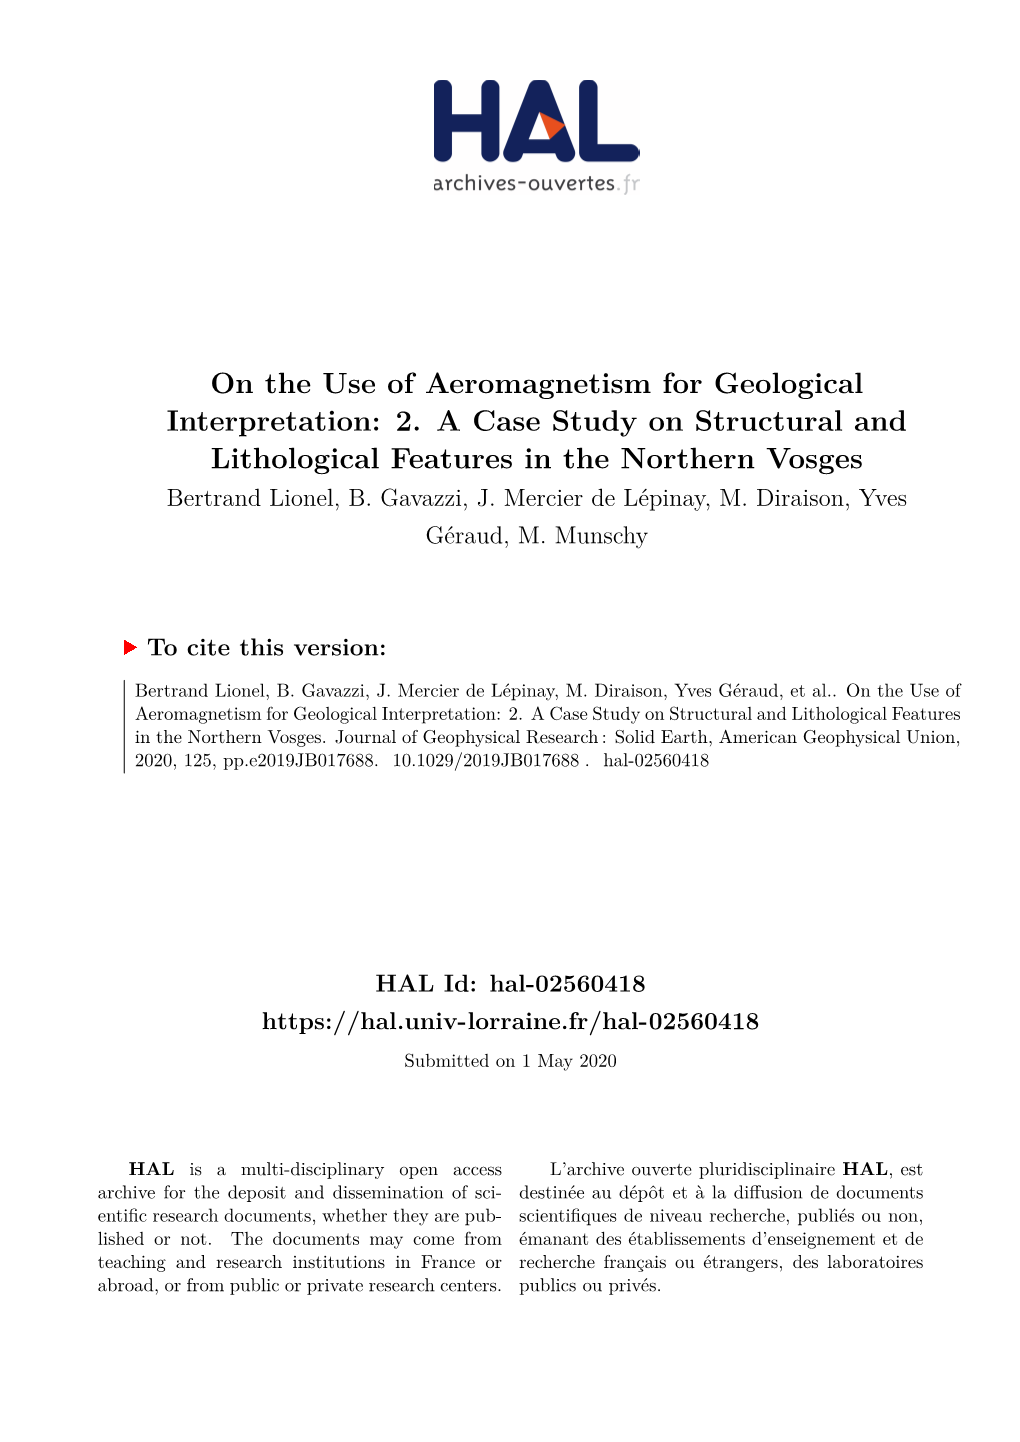 On the Use of Aeromagnetism for Geological Interpretation: 2